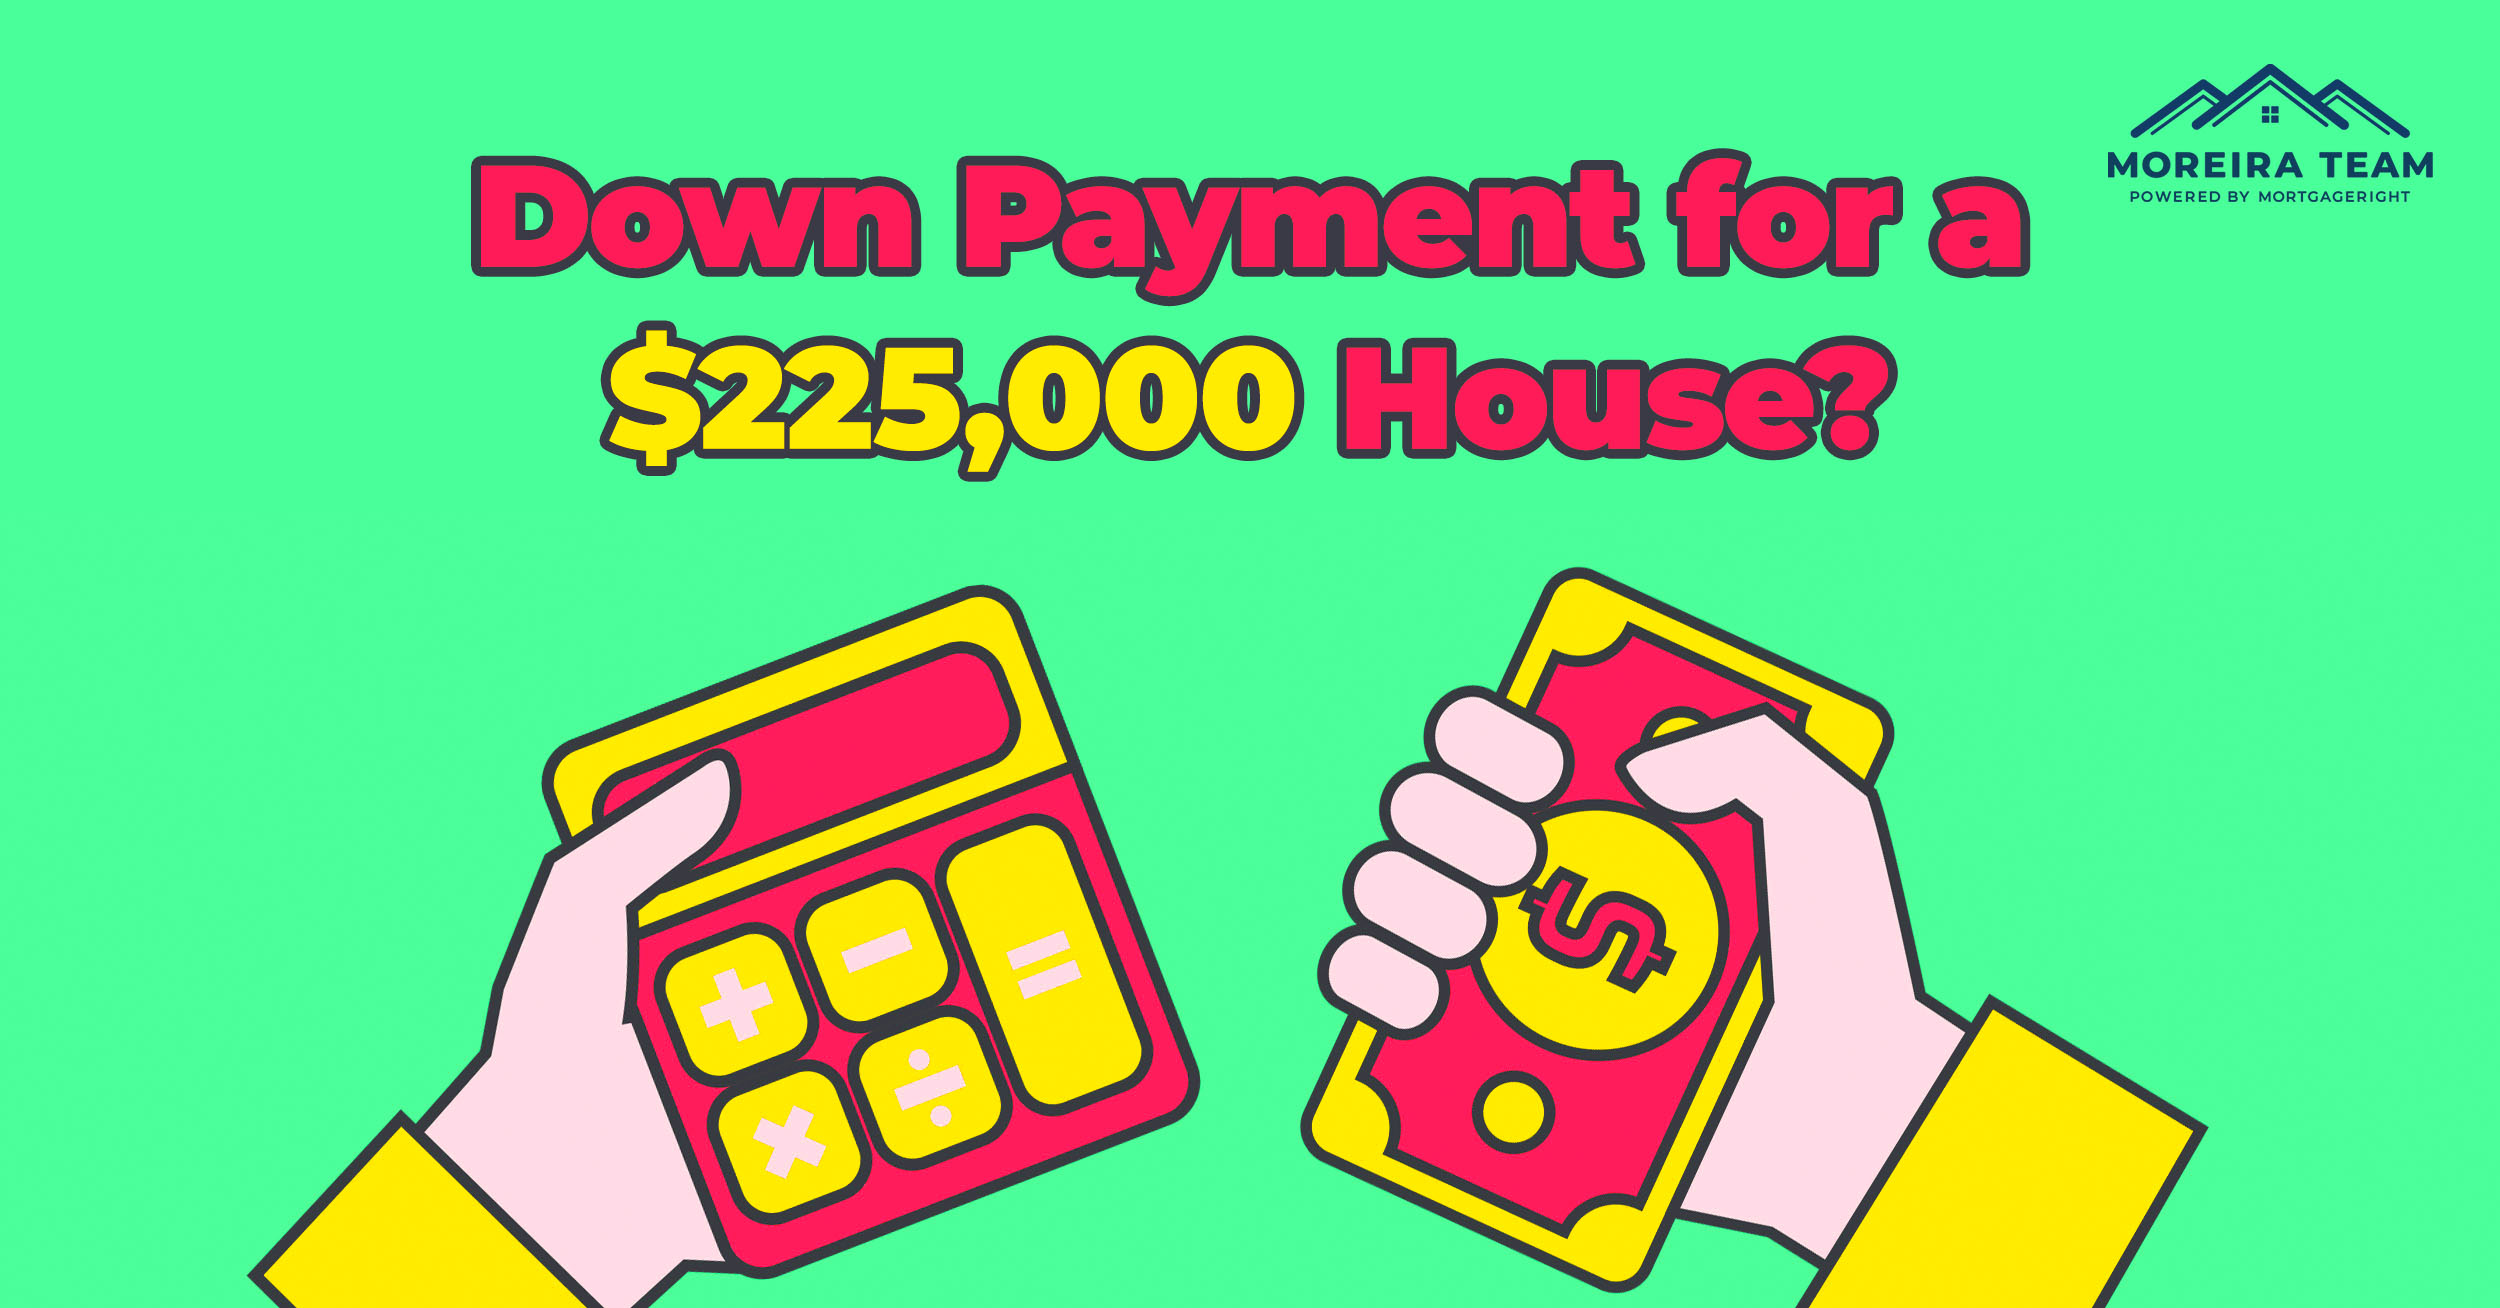 How Much is a Down Payment for a $225,000 Home?